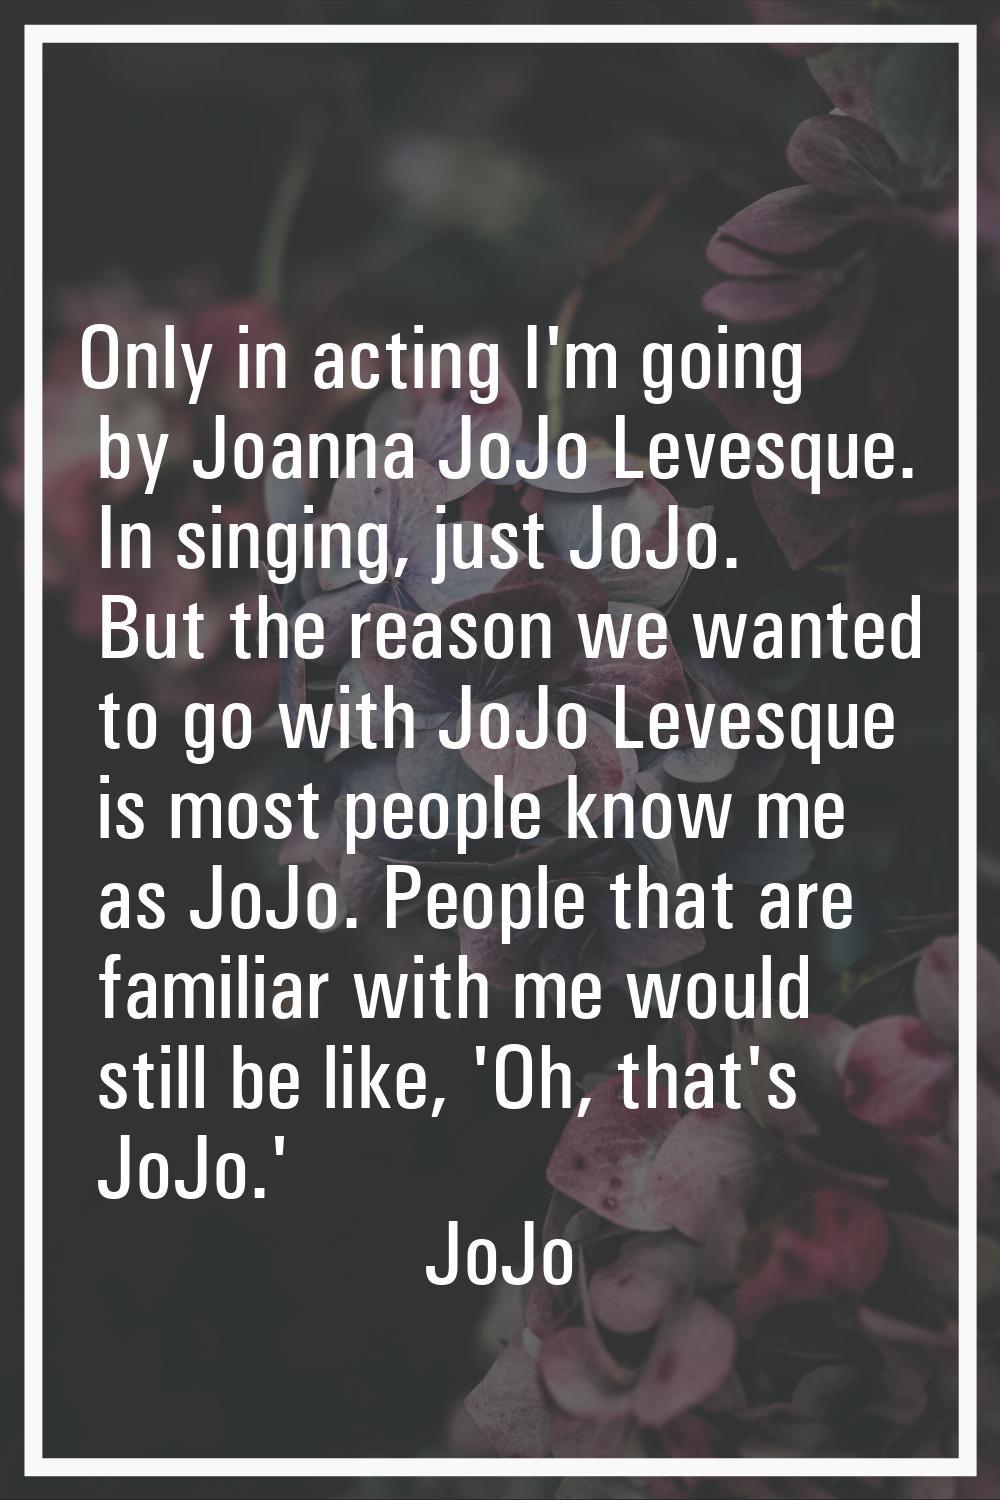 Only in acting I'm going by Joanna JoJo Levesque. In singing, just JoJo. But the reason we wanted t